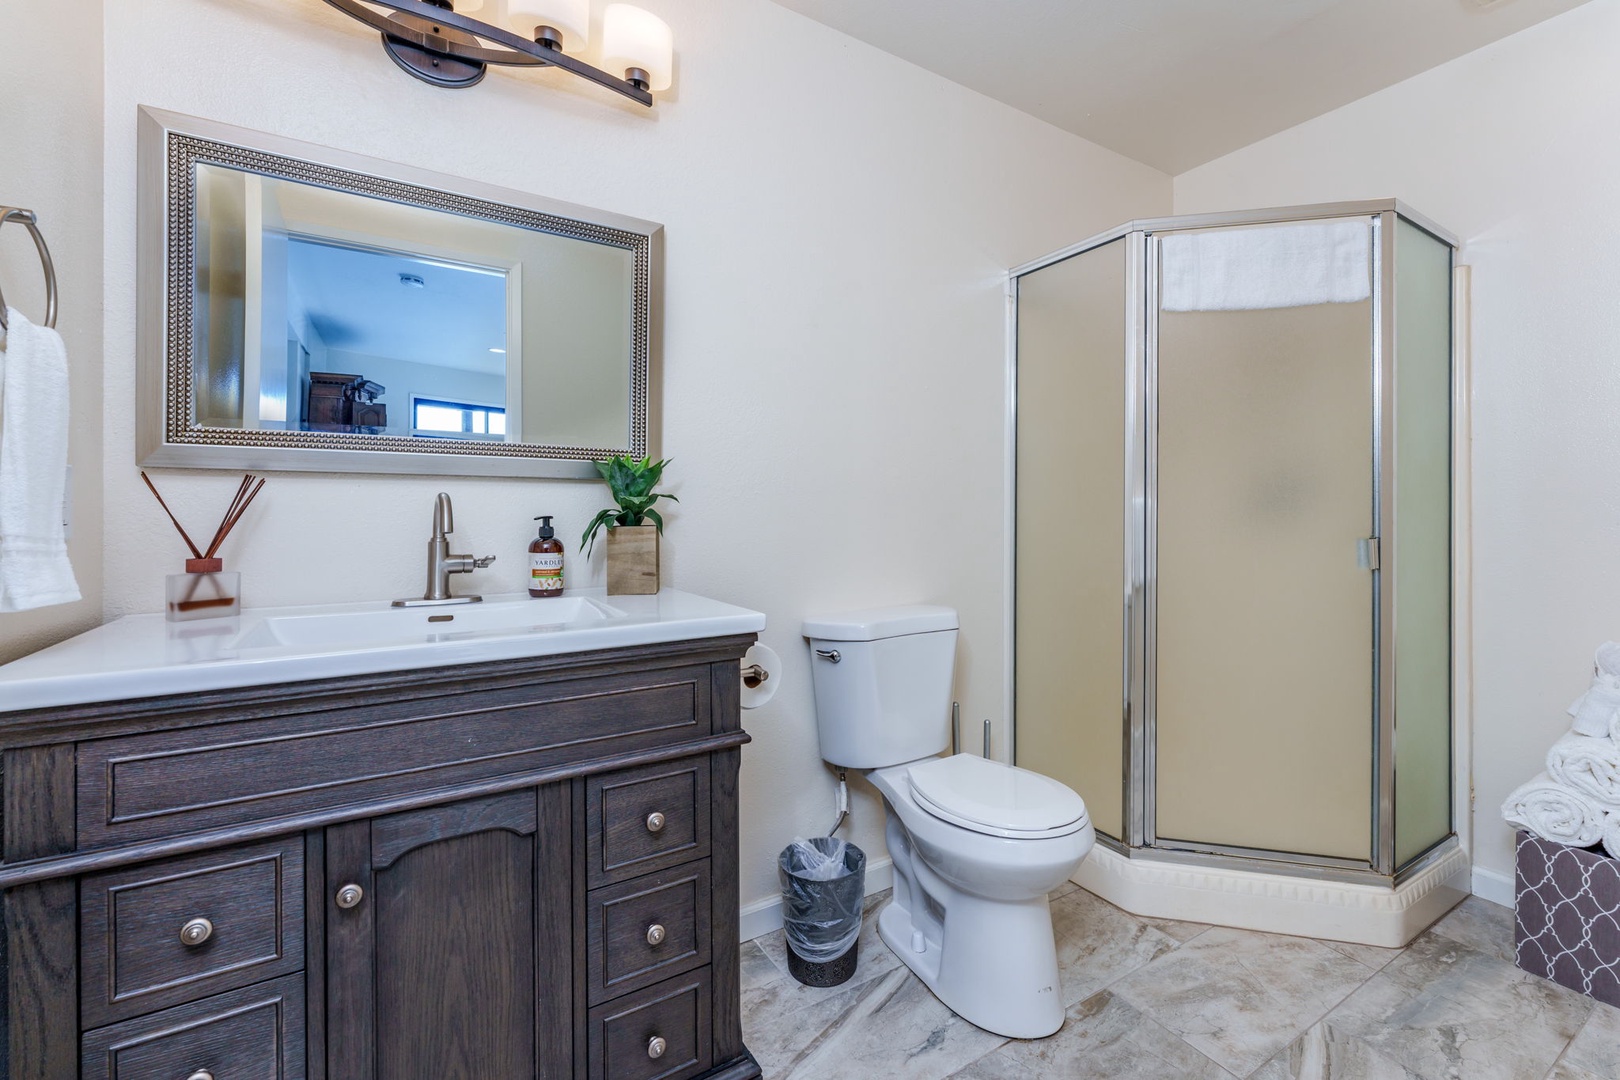 The Lower-Level shared Bathroom offers a Single Vanity and Standalone Shower